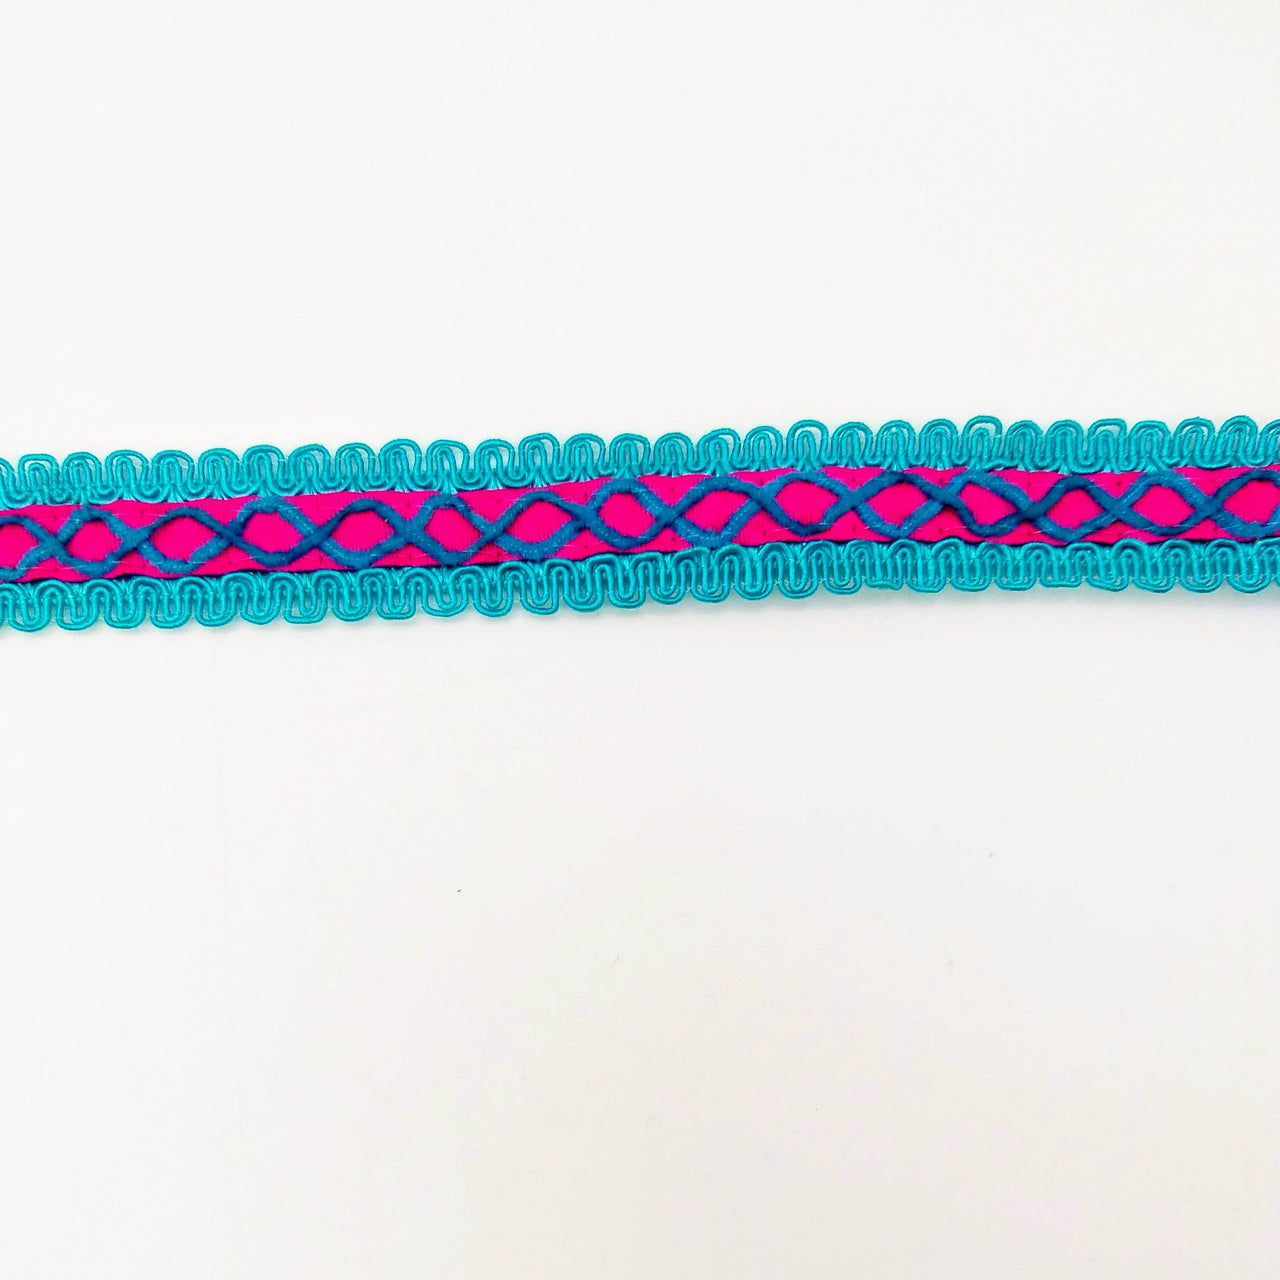 Fuchsia Pink Cotton Fabric Lace Trim with Blue Thread Embroidery, Trim By 3 Yards, Craft Decorative Ribbon